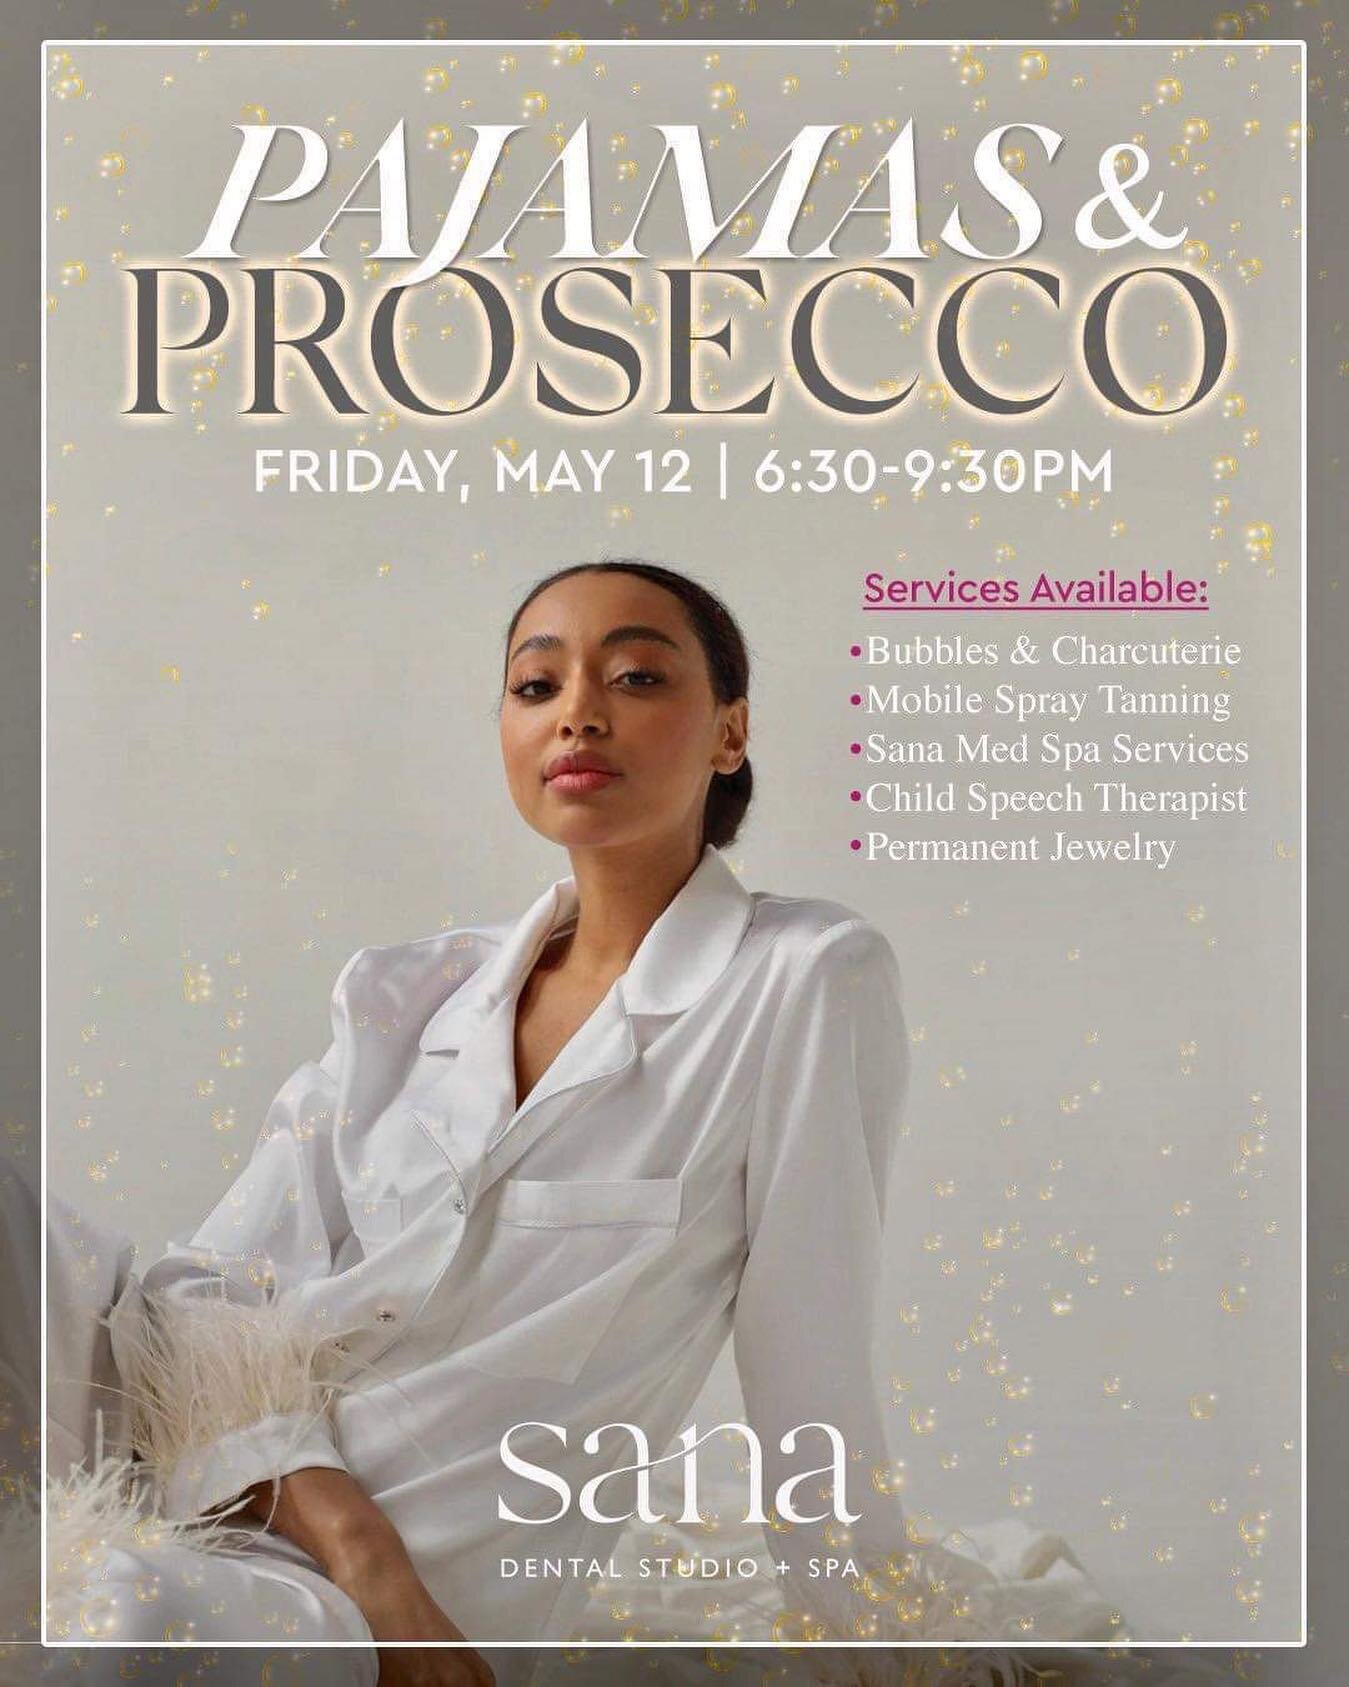 Come hang out with me tonight and Start your Mother&rsquo;s Day weekend off with Pajamas &amp; Prosecco 🥂. This event hosted by @sanadentalstudioandspa is for moms to mingle in style.